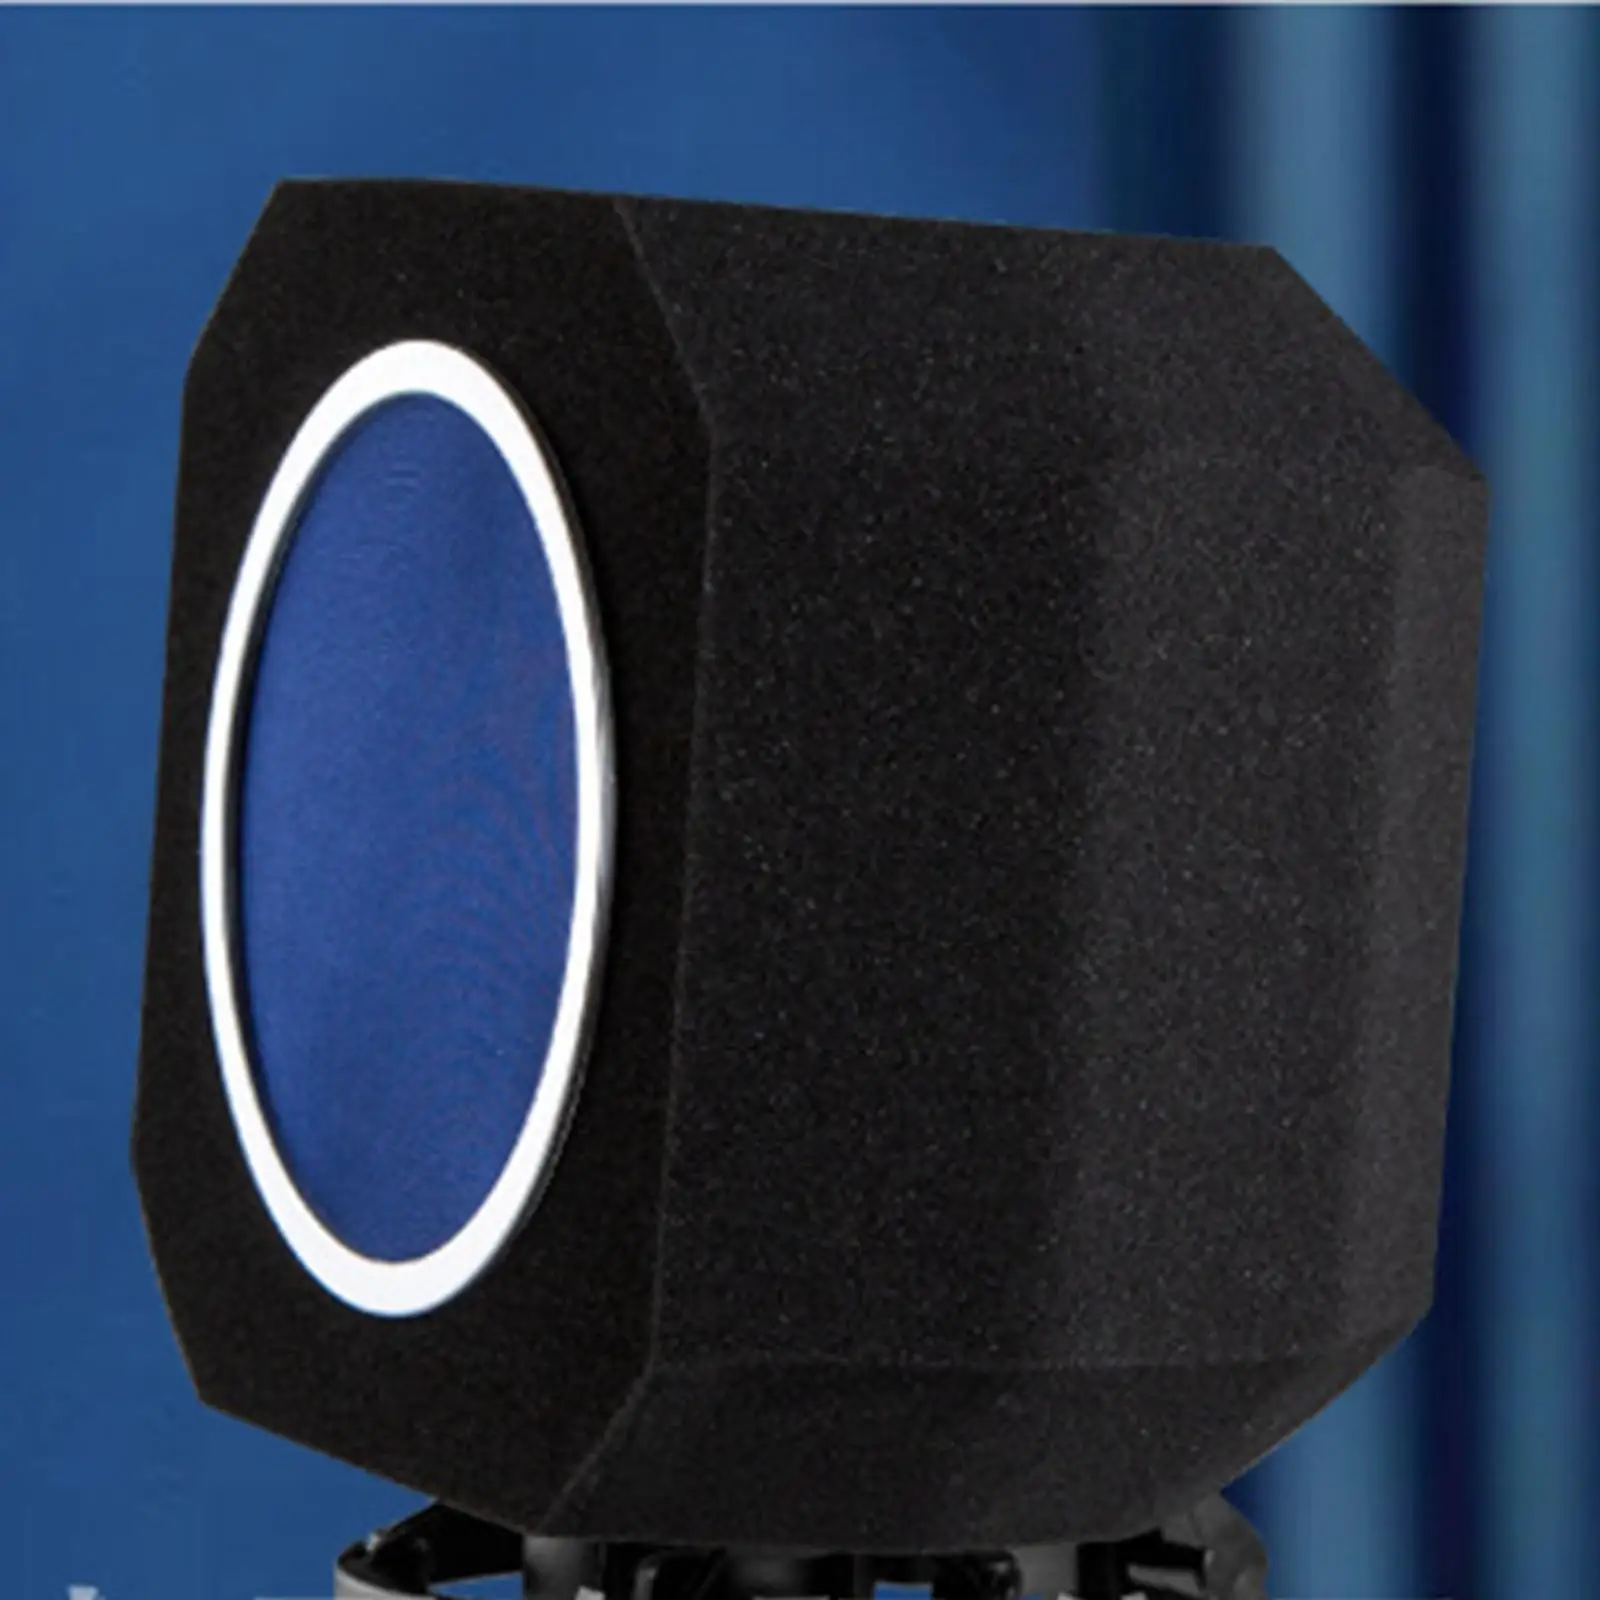 Microphone Sponge Portable Professional Microphone Wind Screen Sound-Absorbing Reflection Filter for Studio Recording